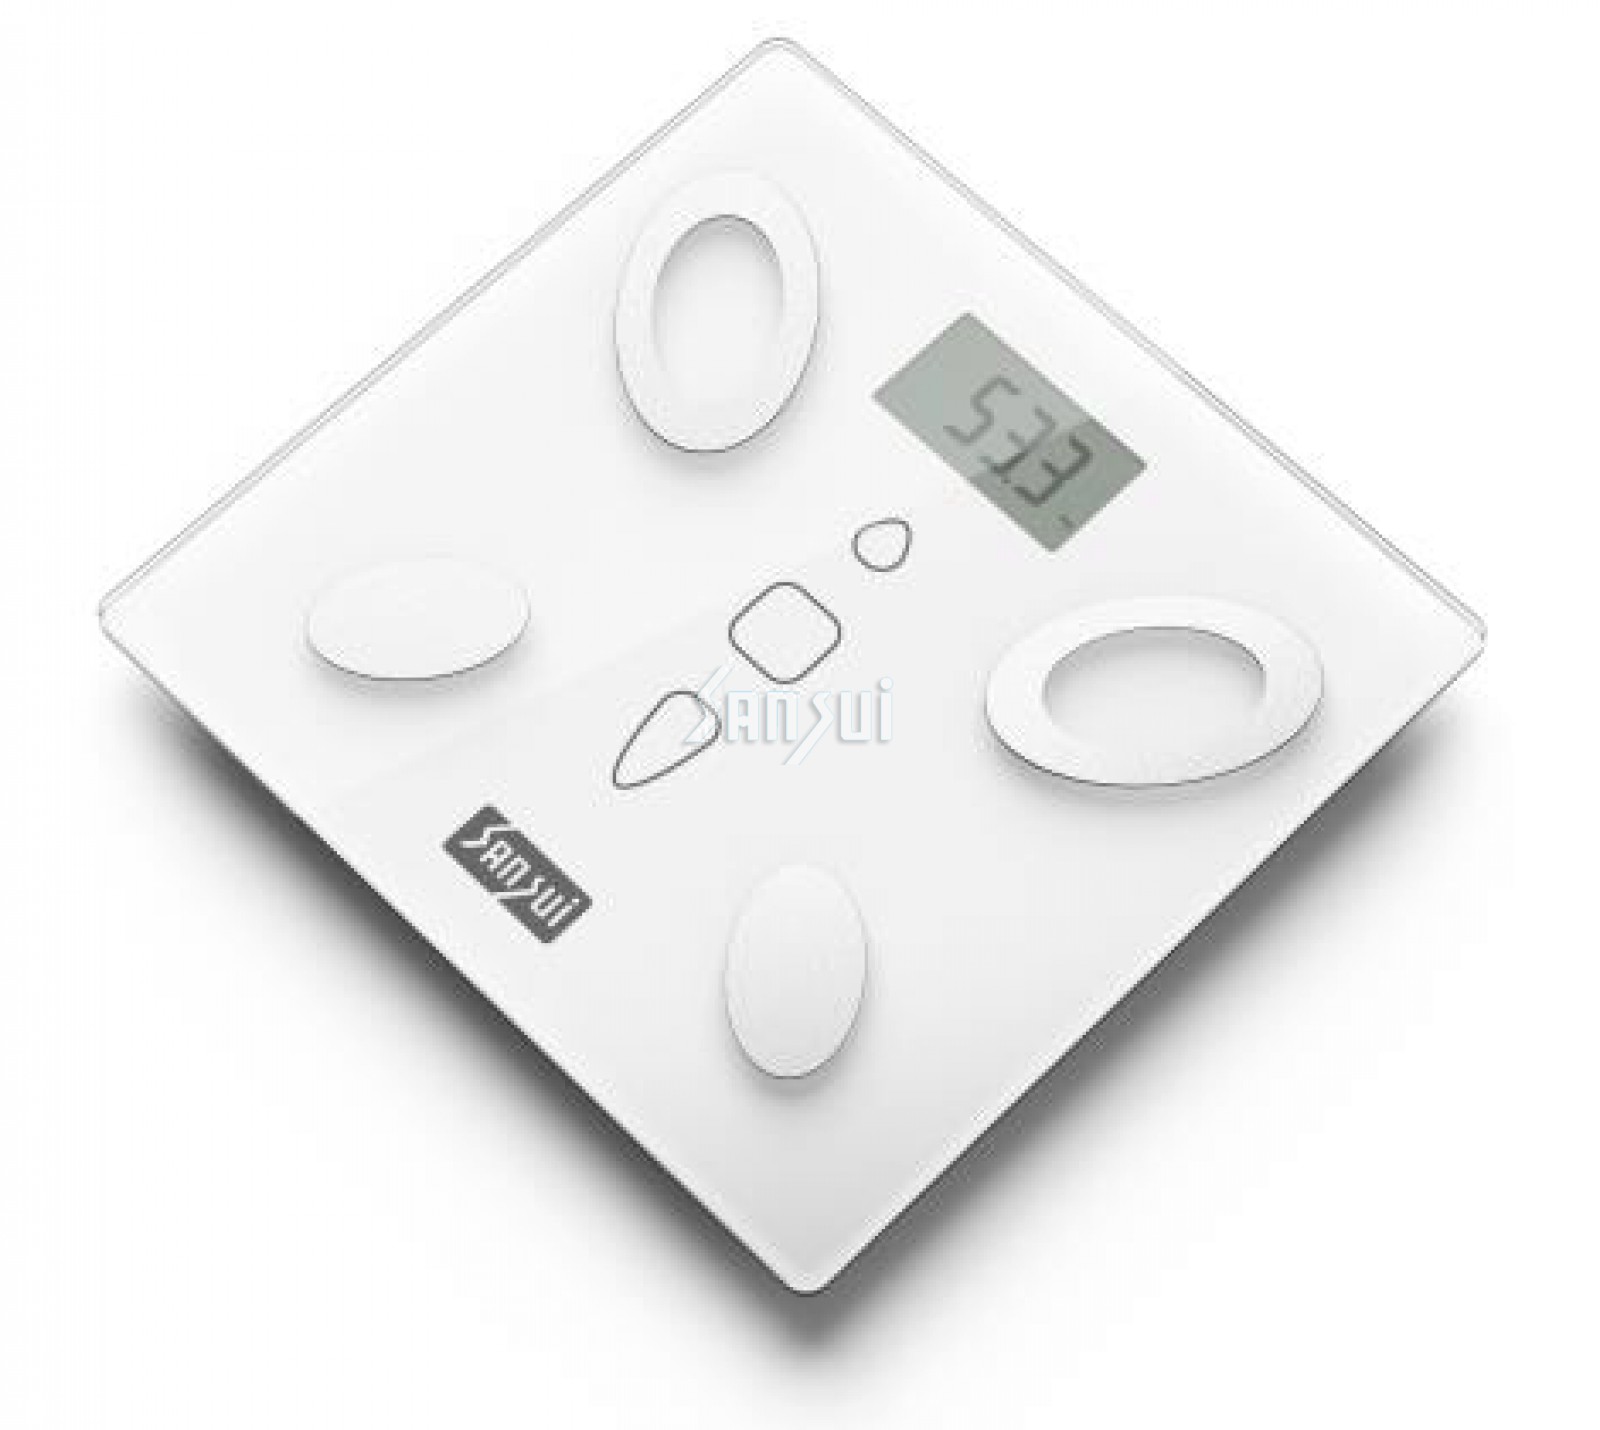 Sansui Body Composition Weighing Scale